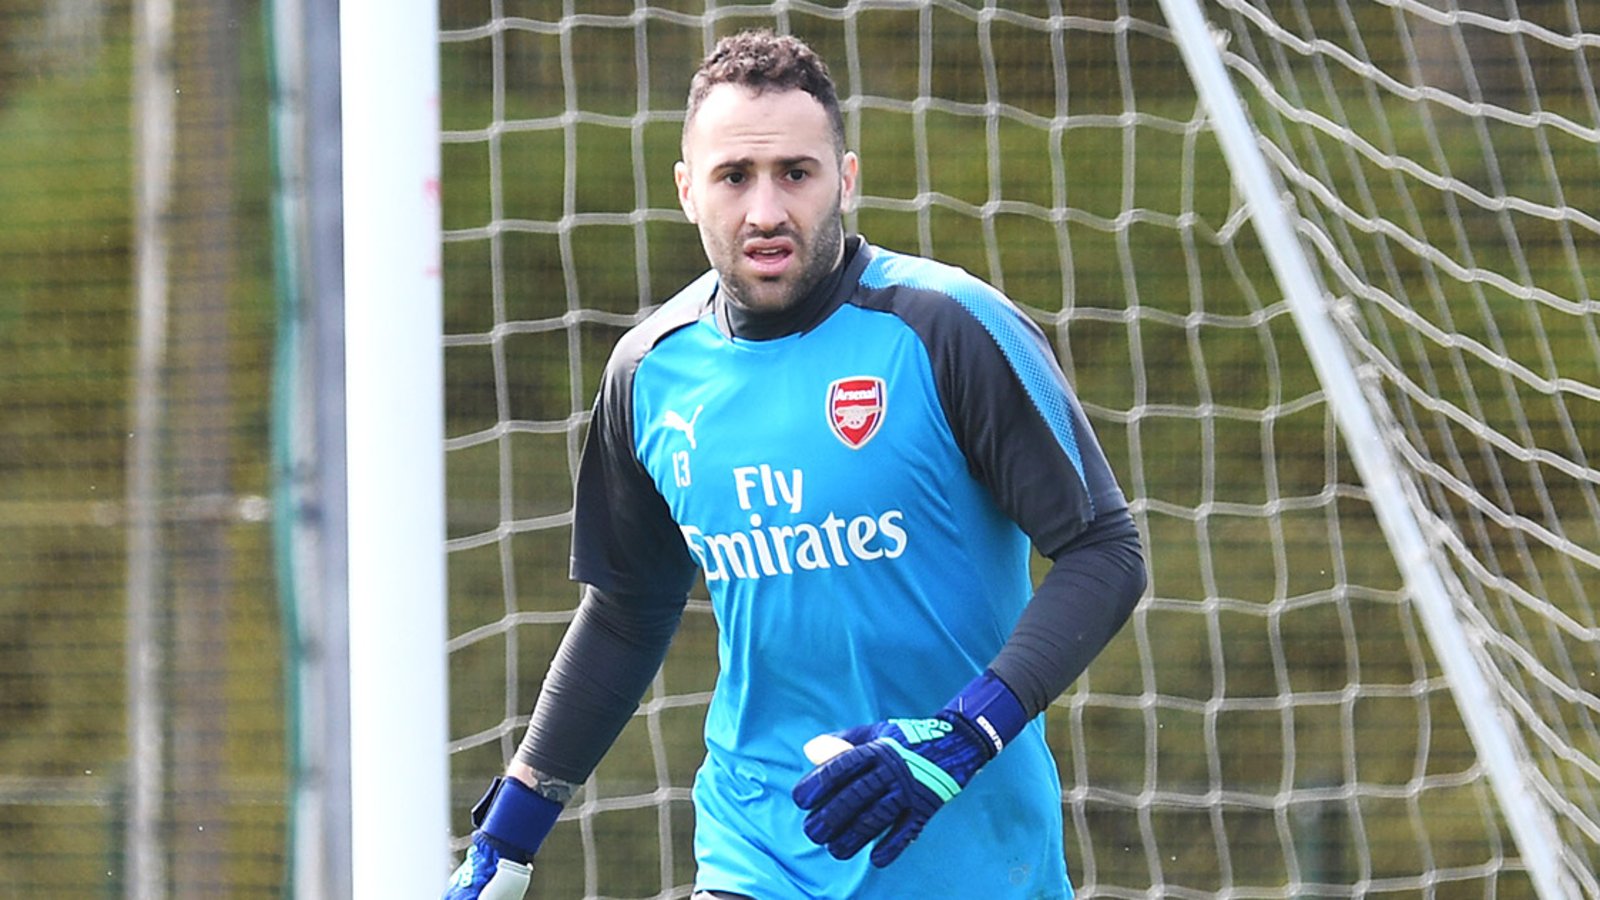 David Ospina leaves for Napoli | Club announcement | News | Arsenal.com